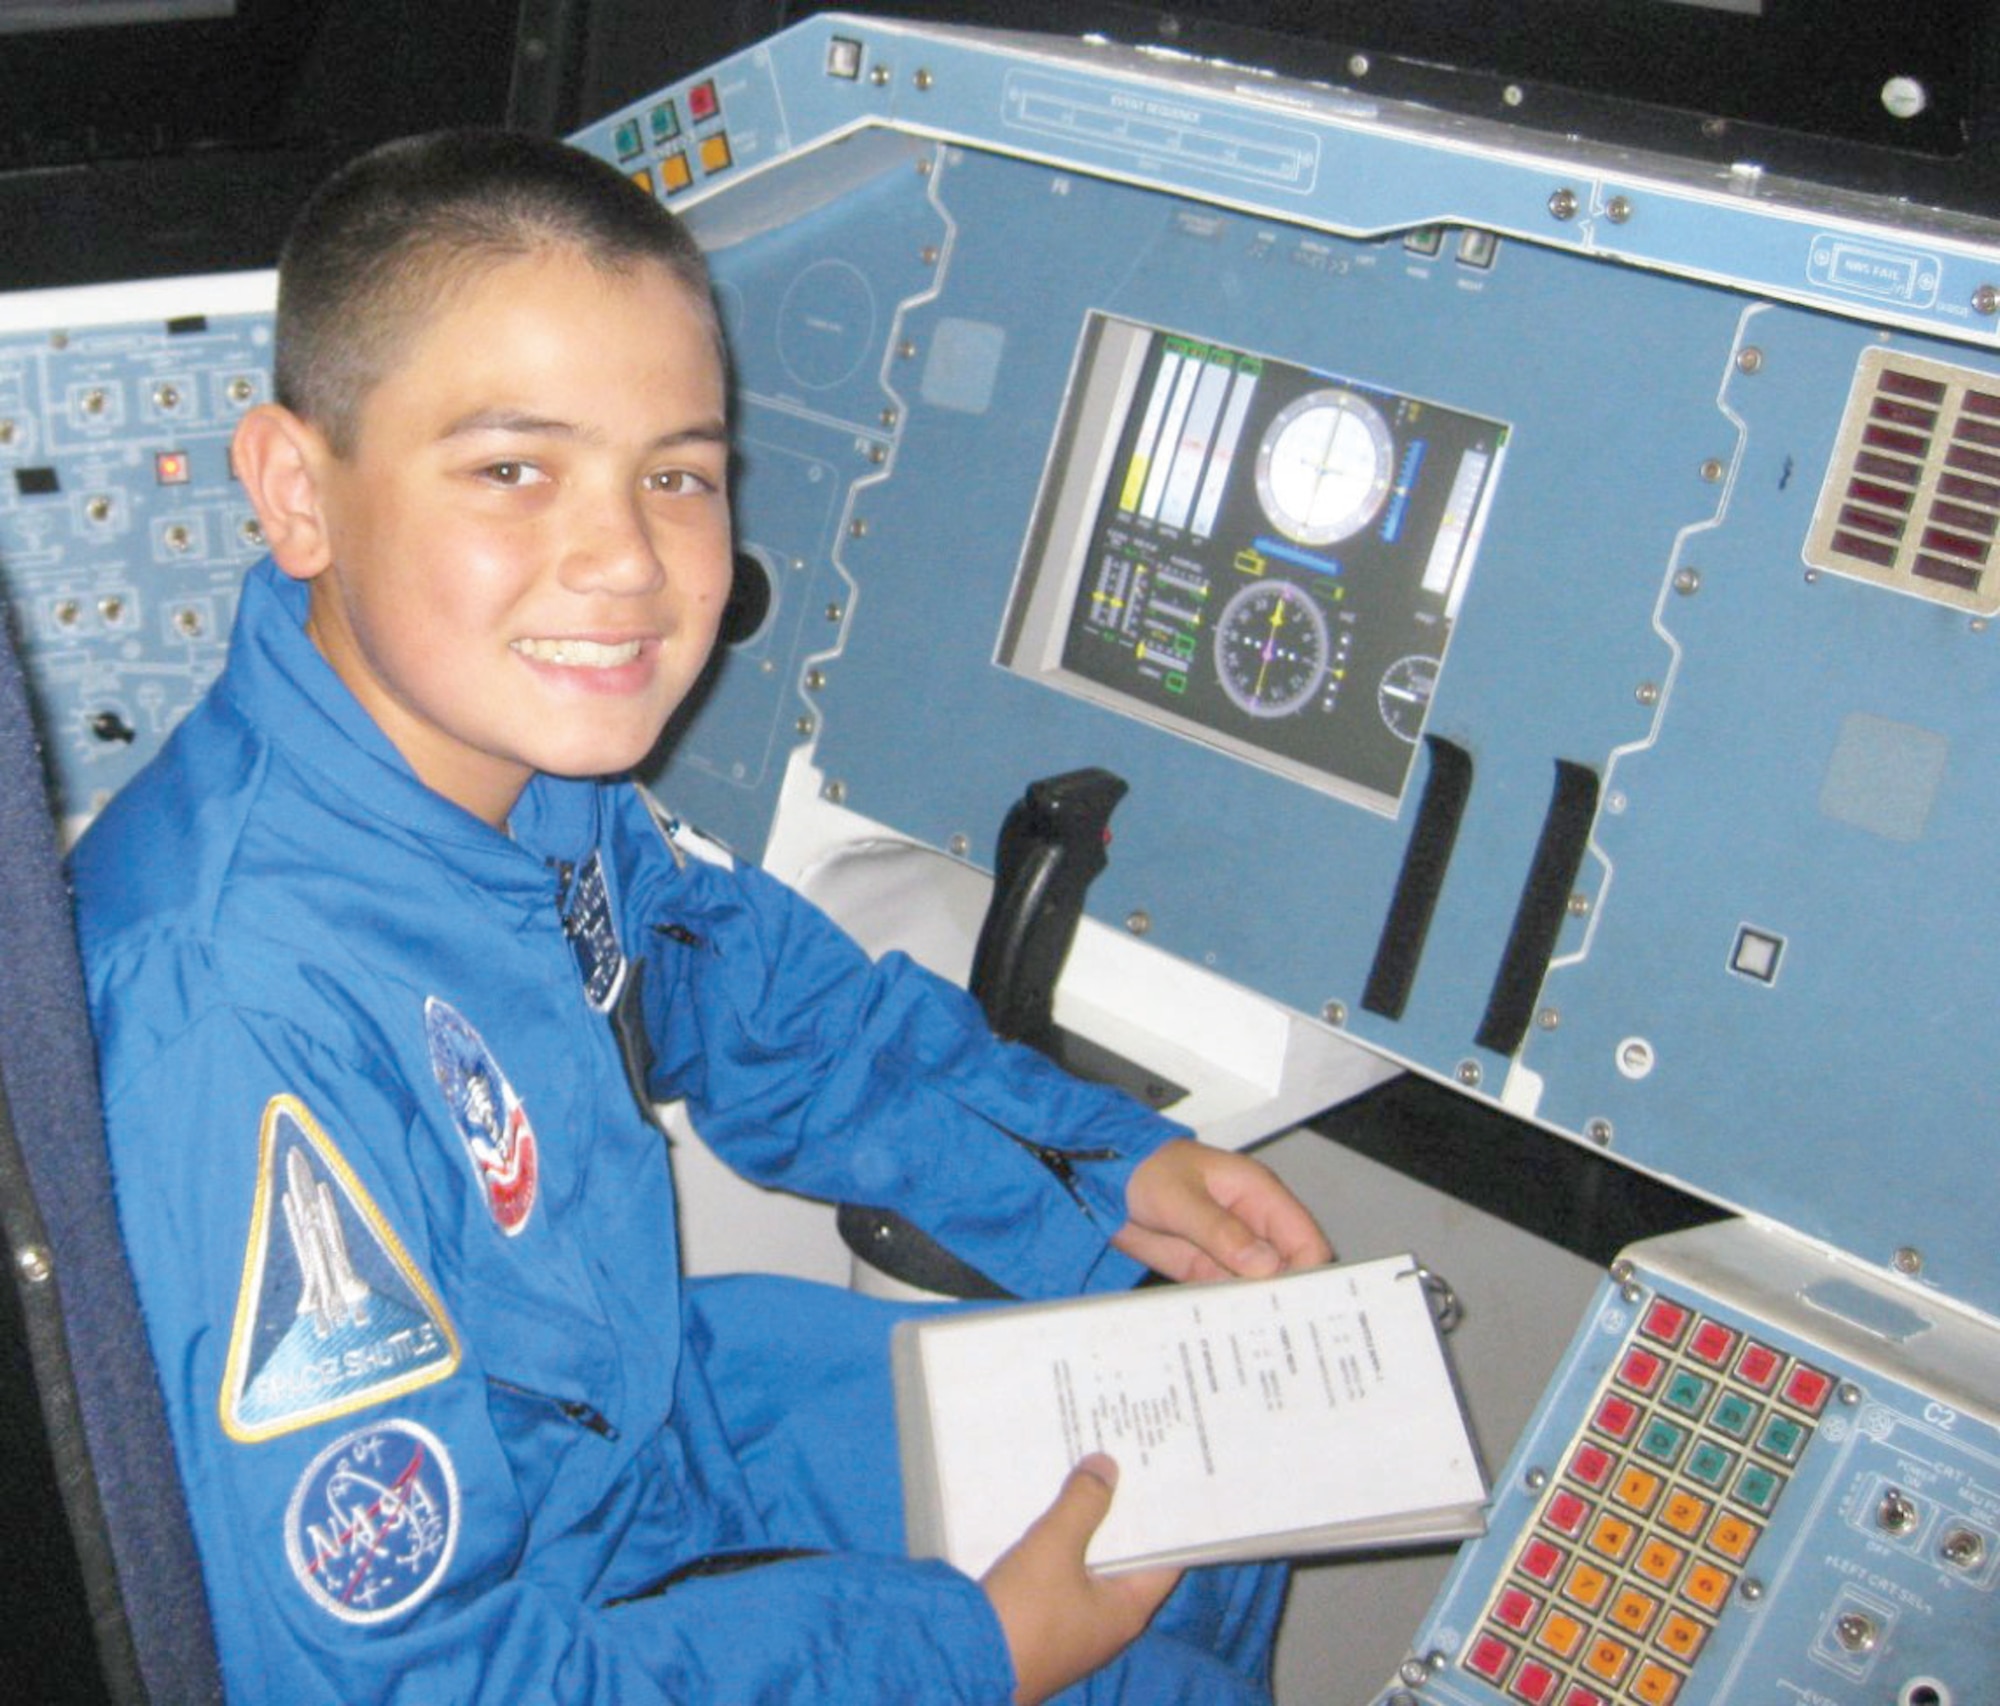 Charles Macleod reviews a checklist in the space shuttle simulator in Huntsville, Ala.
Charles is a 9th grader from Redlands, Calif., who was selected to attend Air Force Space Camp this year.  (U.S. Air Force photo courtesy of Charles Macleod)
